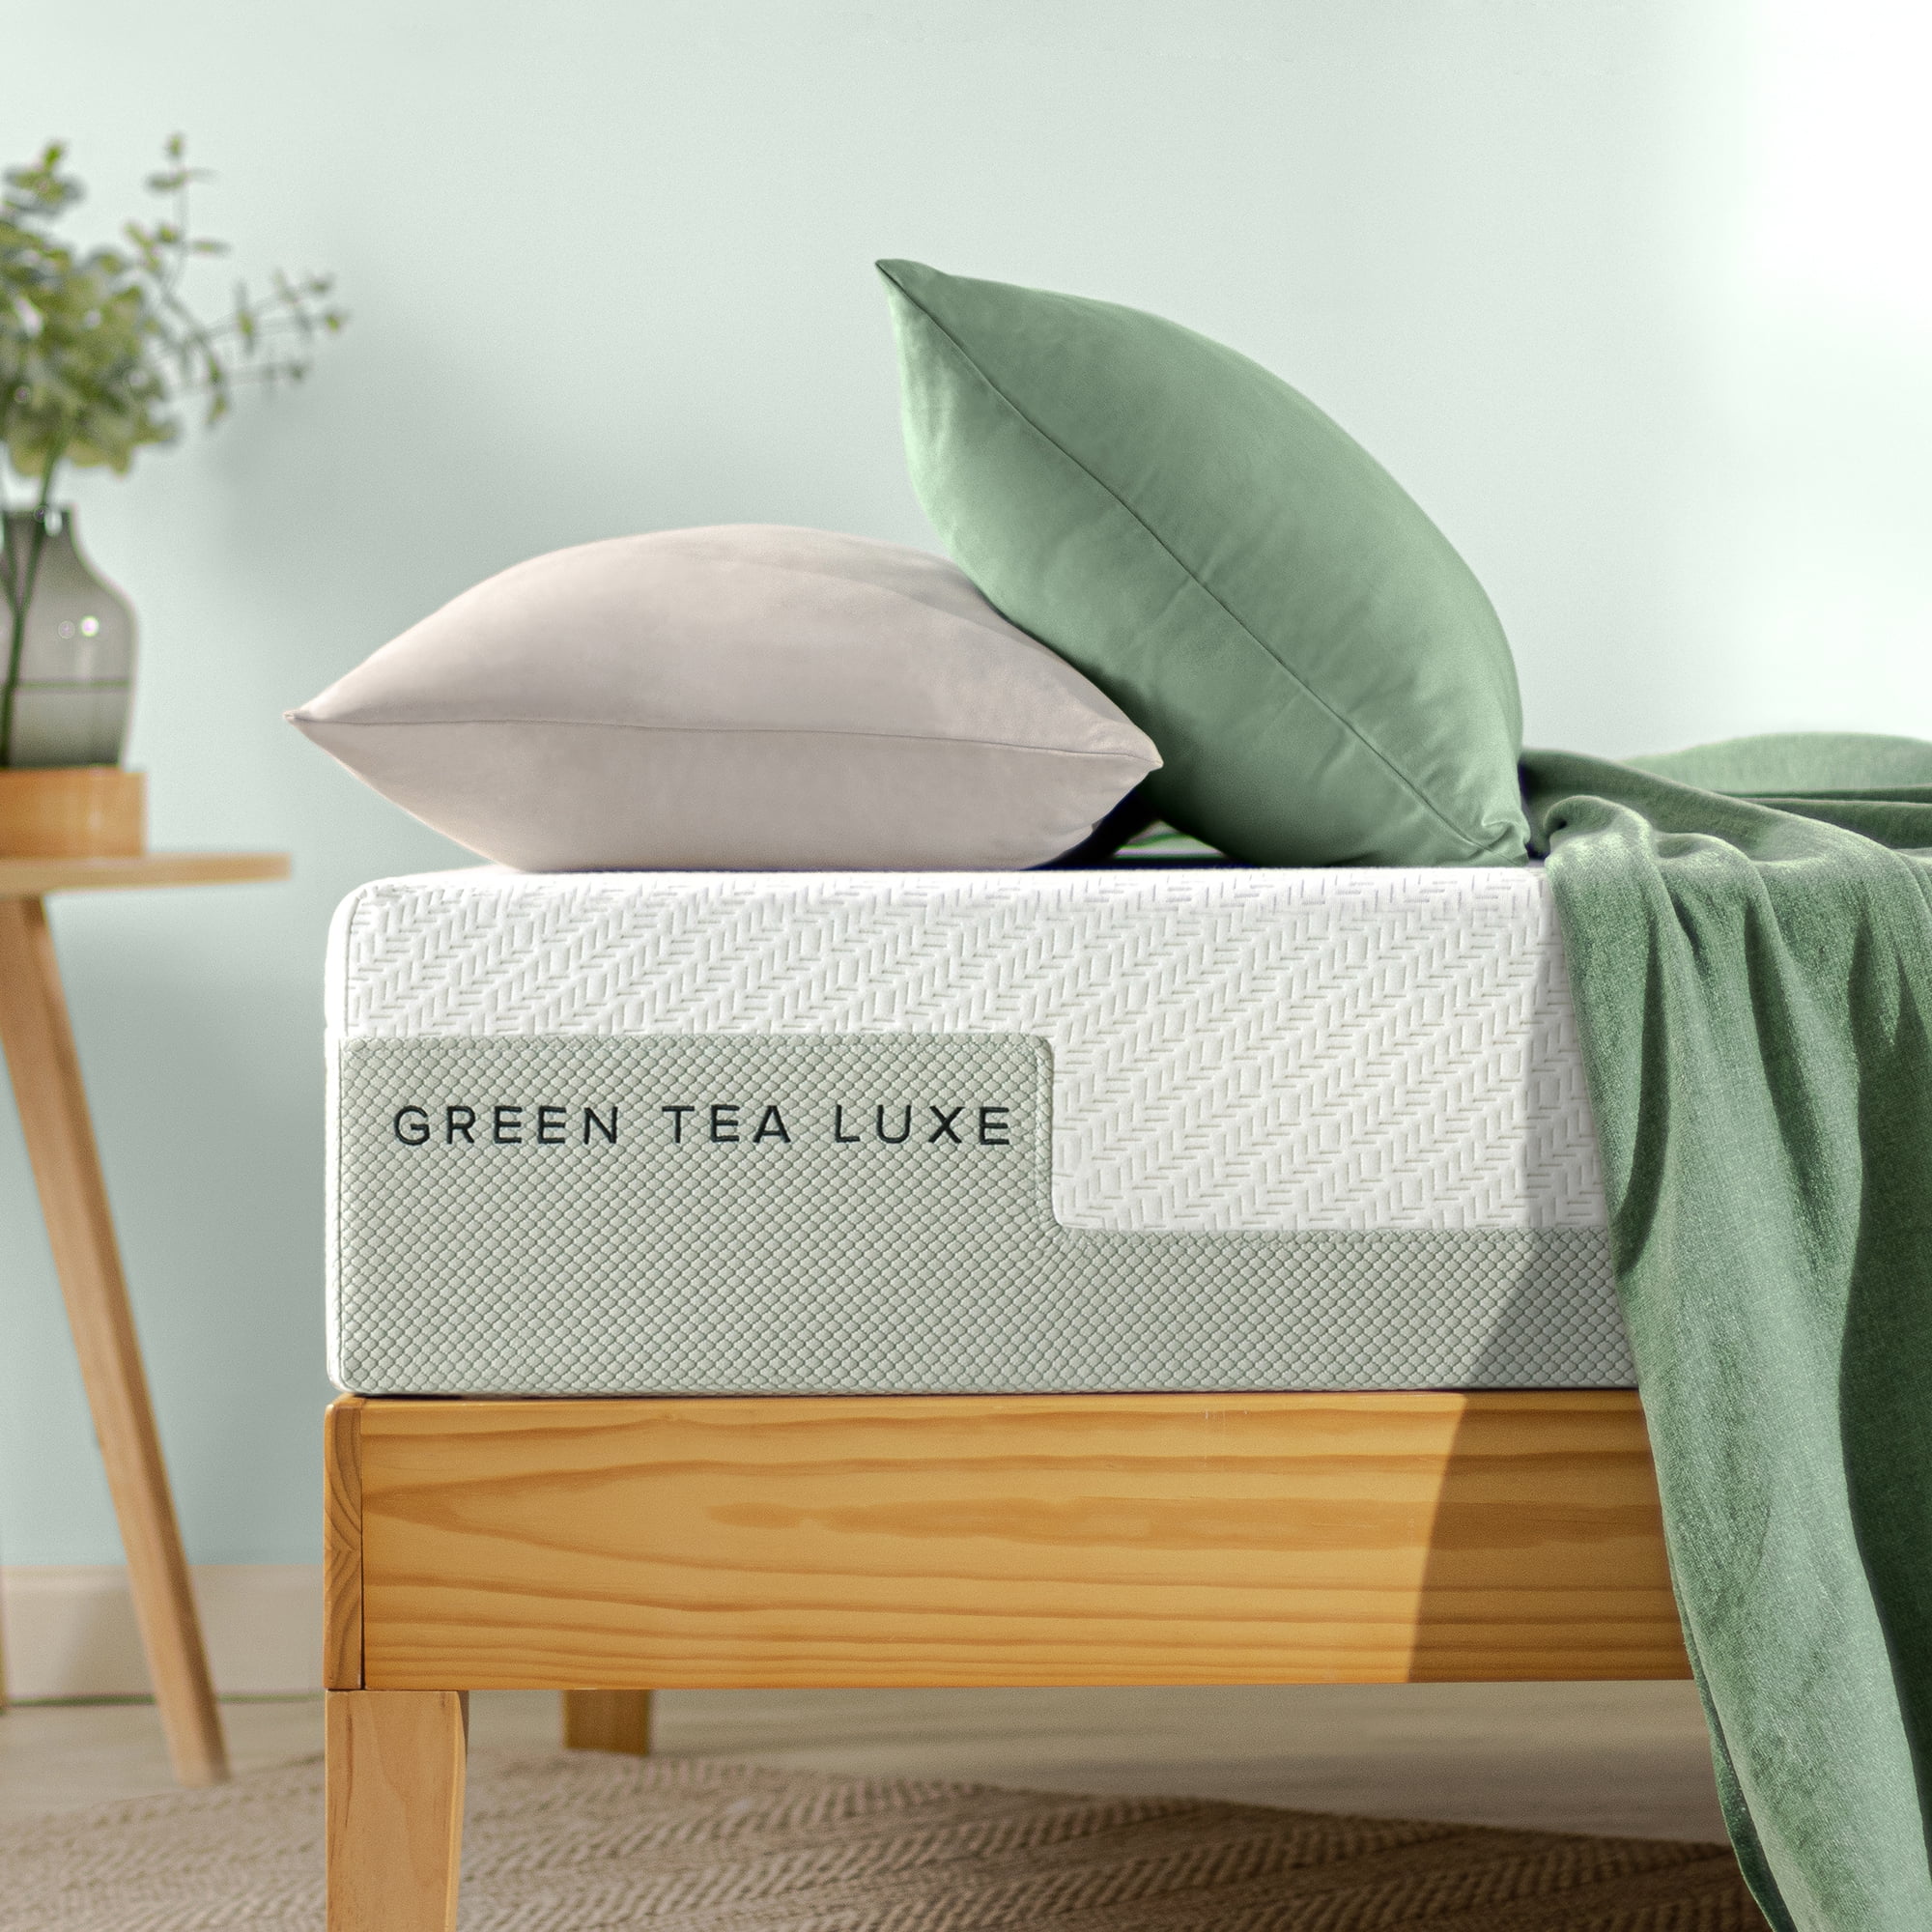 Zinus 10  Green Tea Luxe King Memory Foam Mattress  Made in the USA of US Foam and Global Materials $169